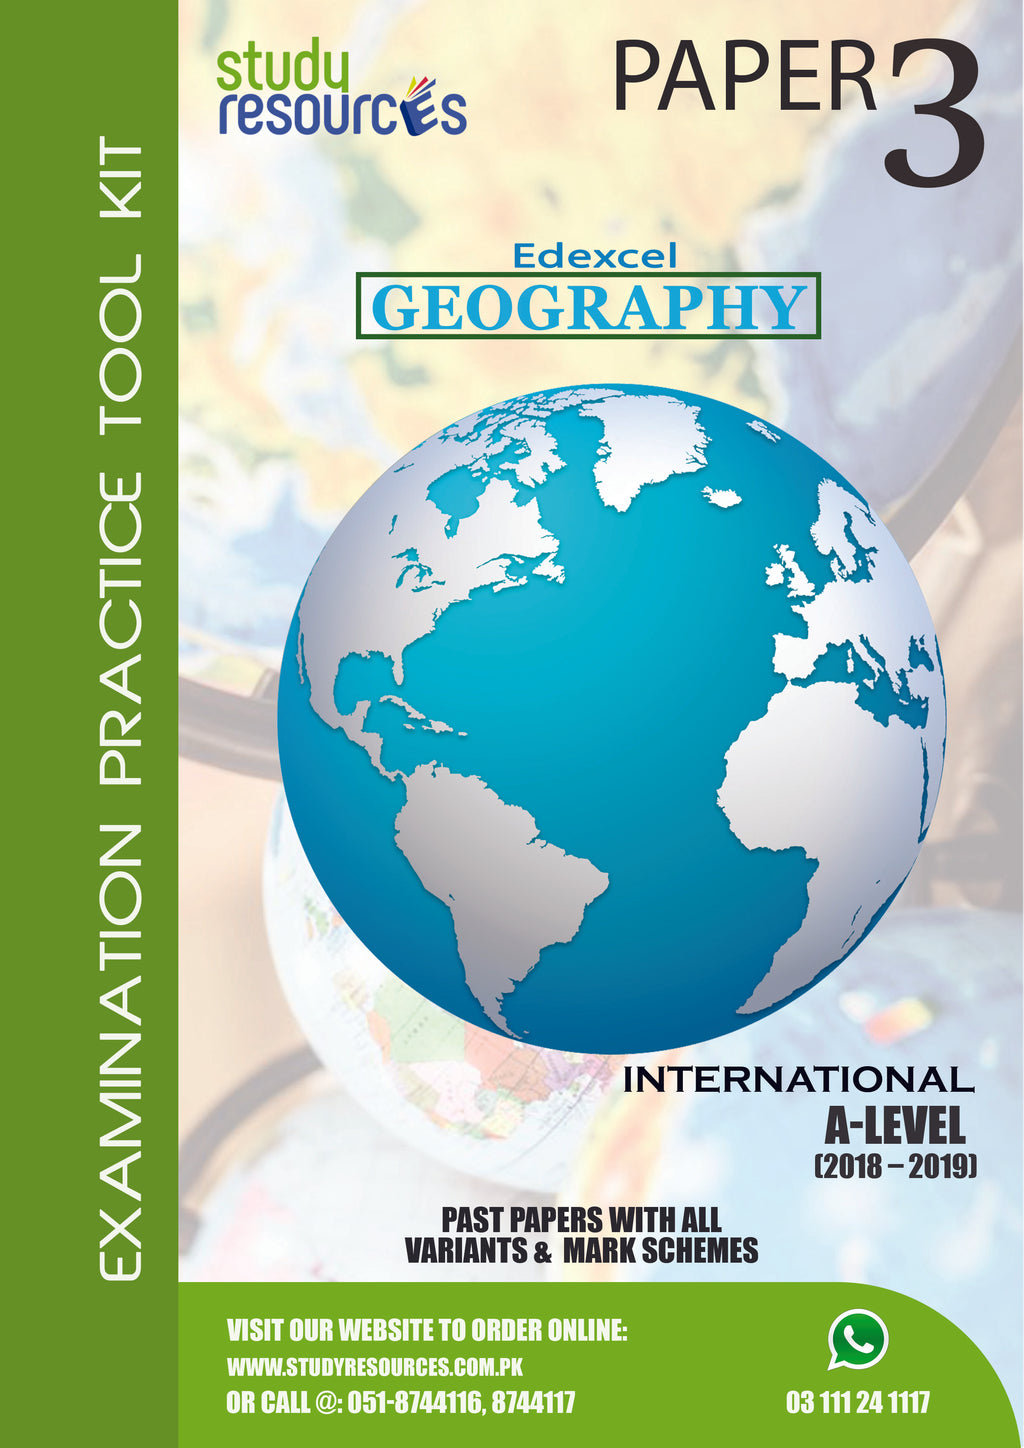 Edexcel A-Level Geography P-3 Past Papers (2018-2019)